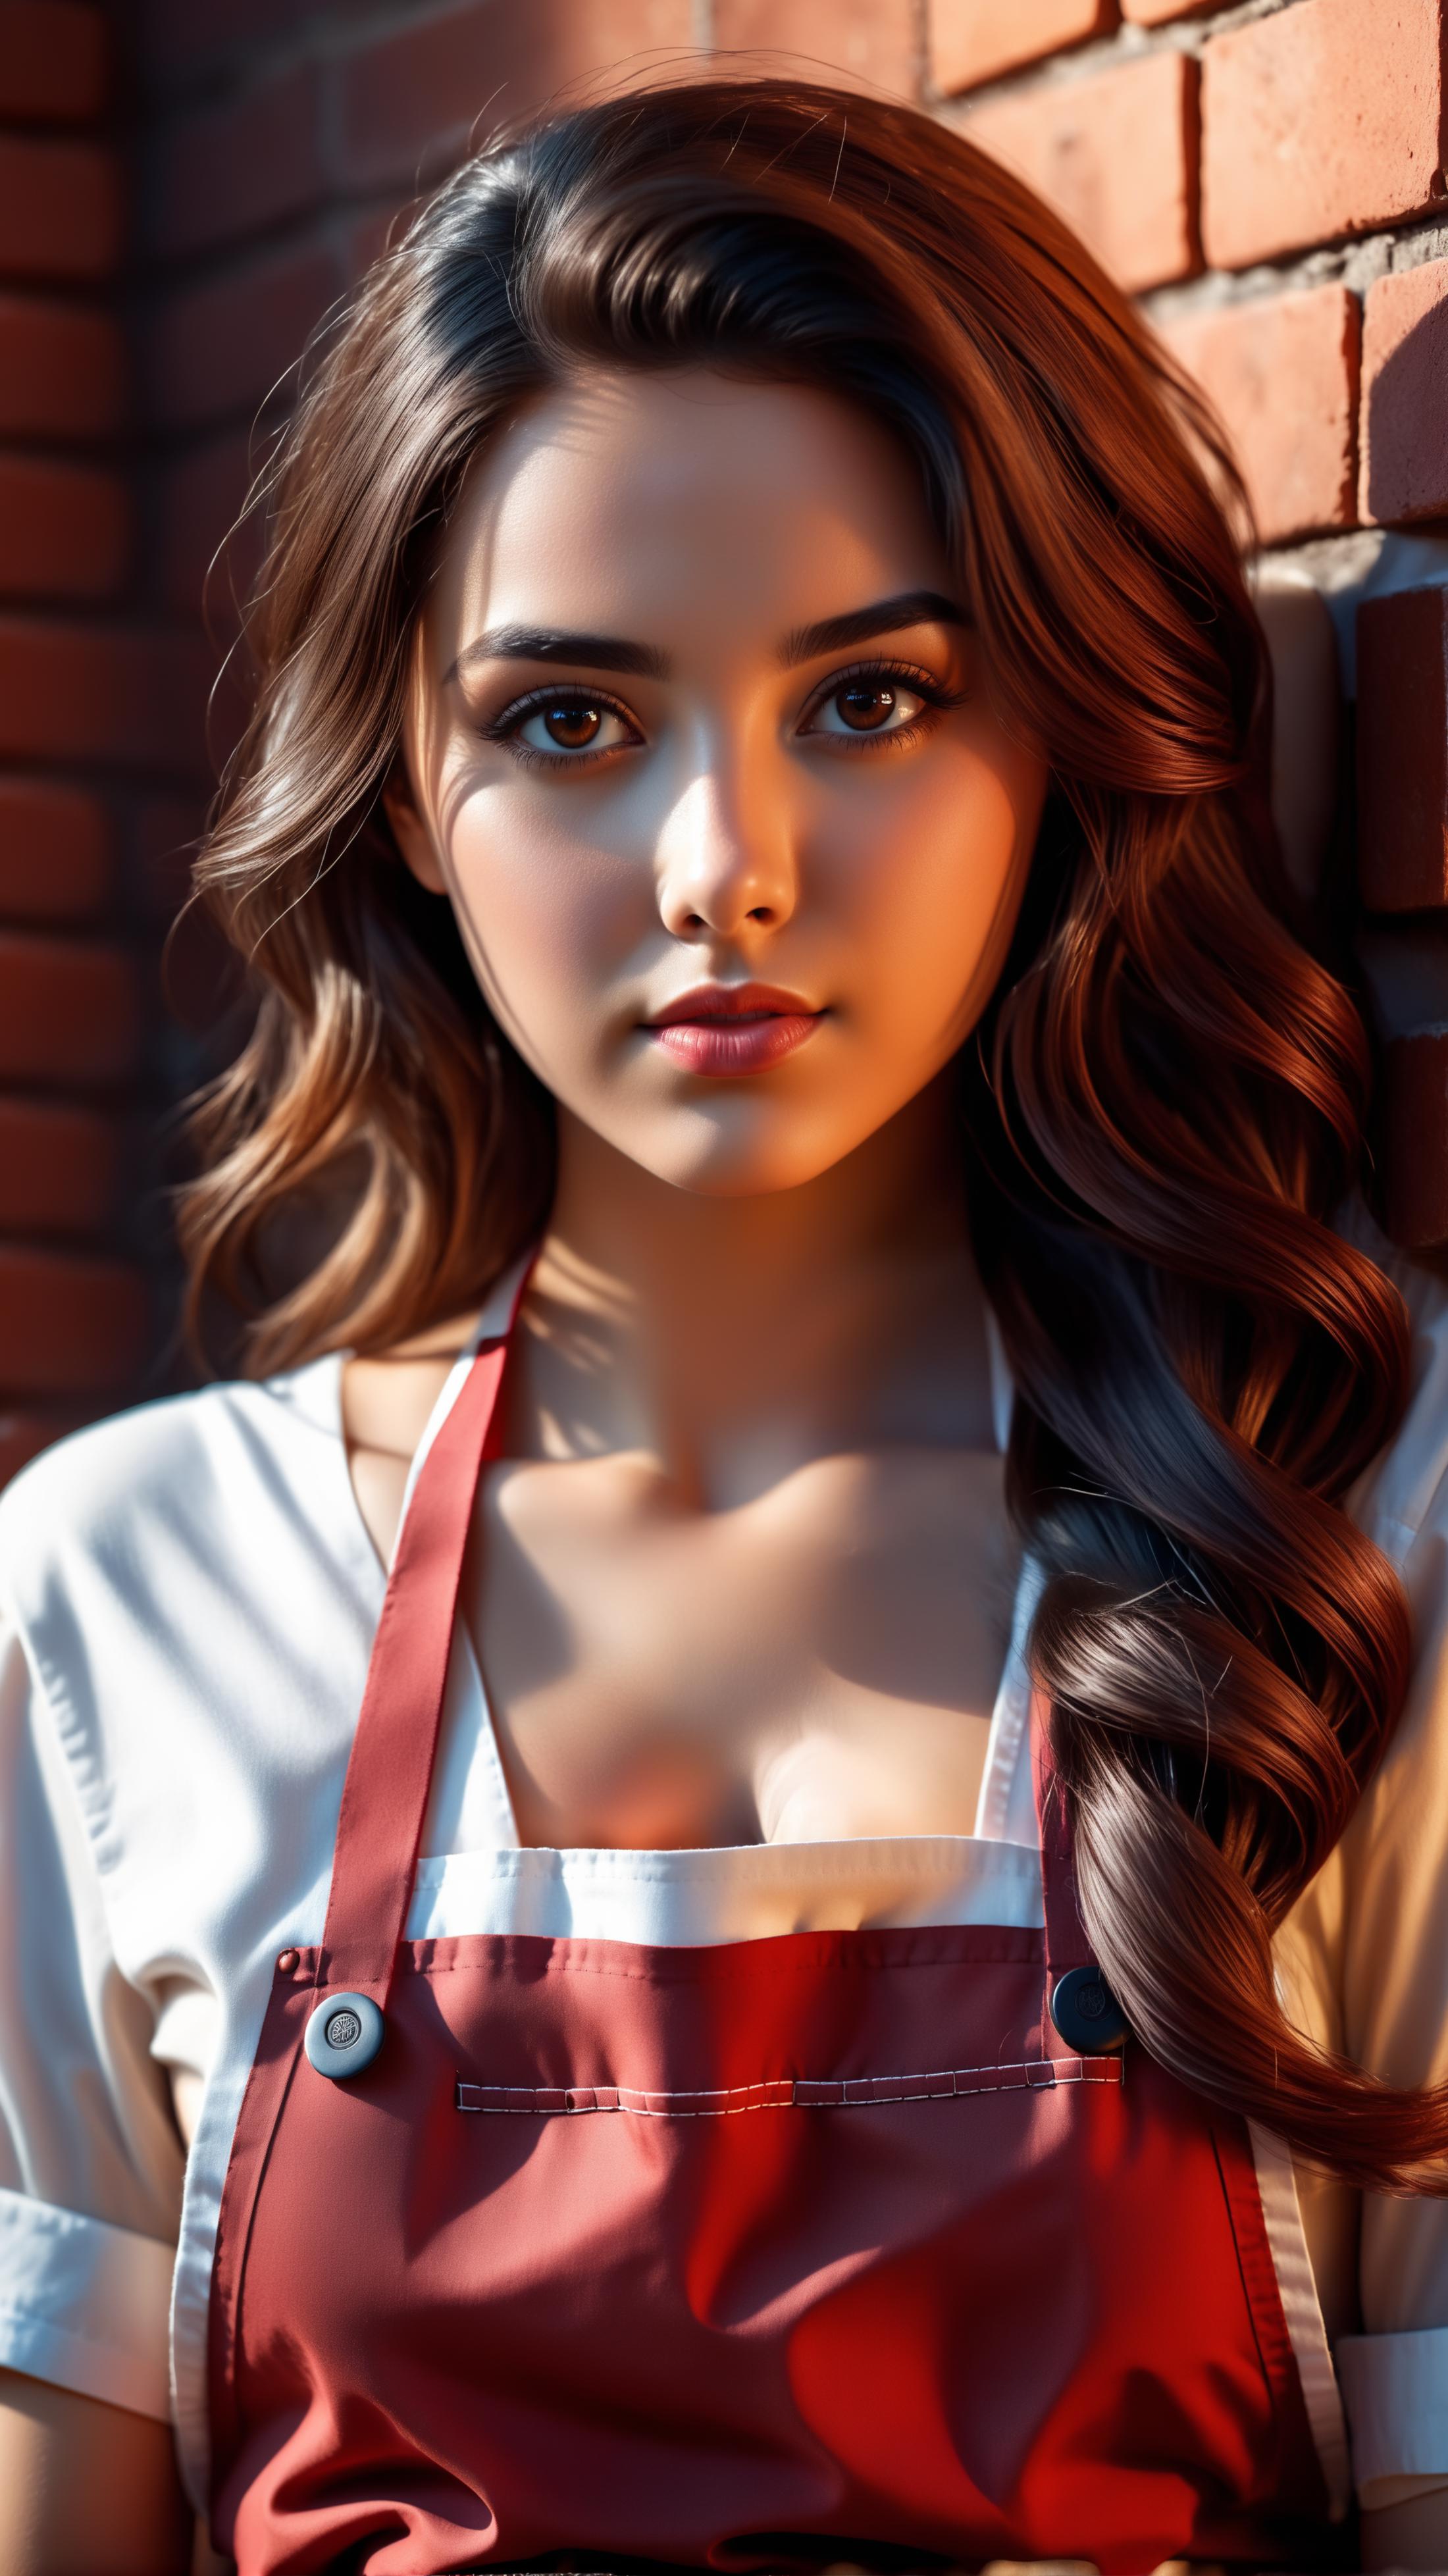 Woman in Apron with Brown Hair and Red Lips.